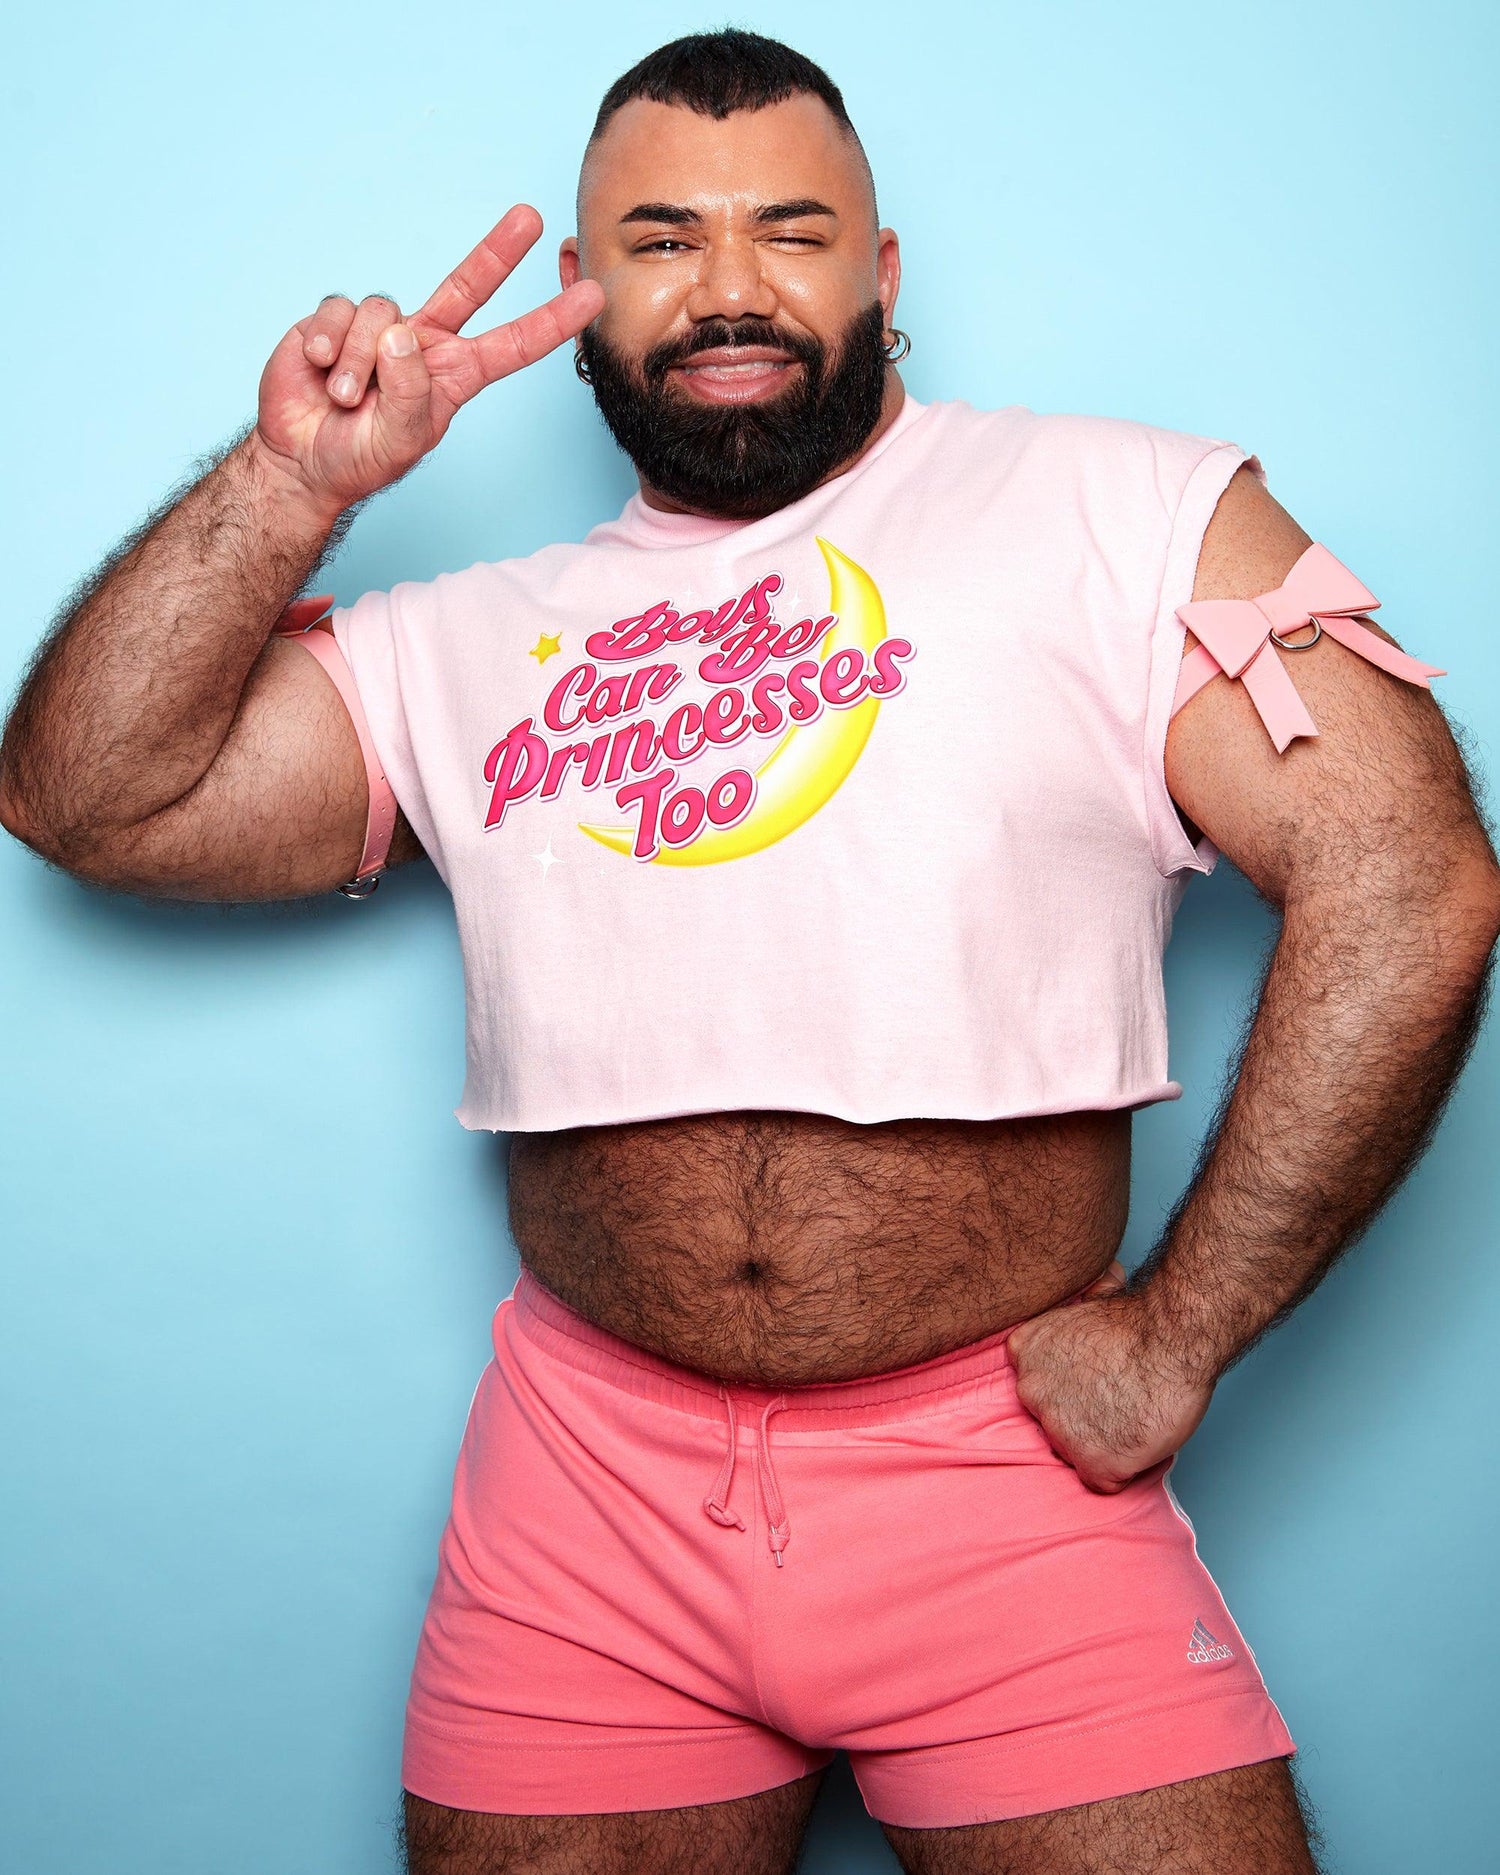 Break Stereotypes: Boys can be princesses too on pink - mens sleeveless crop top. - HOMOLONDON